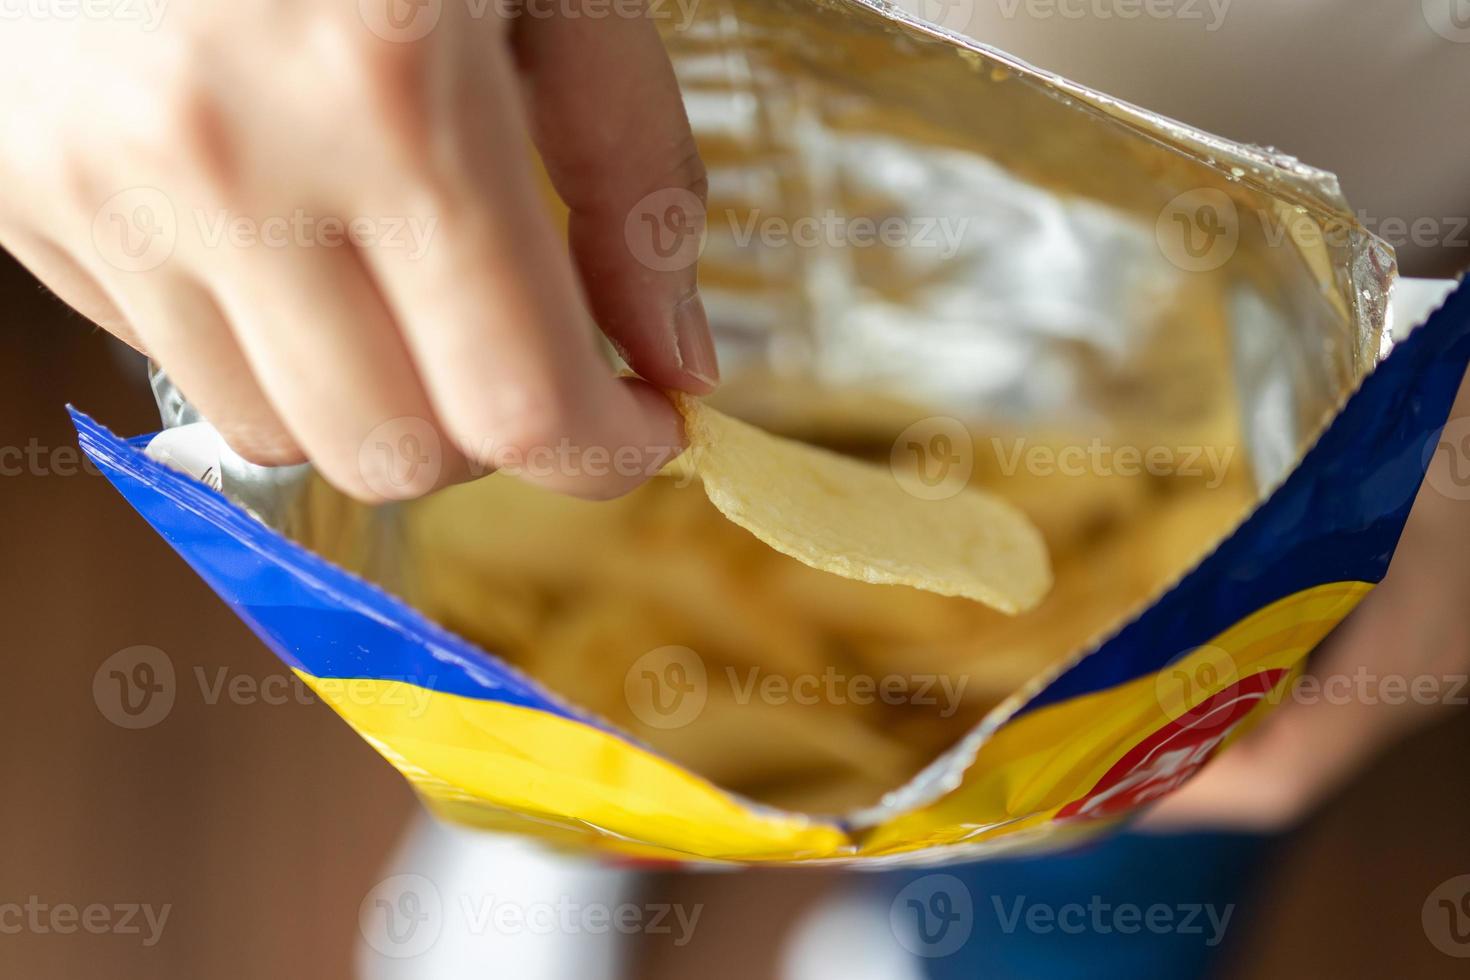 Hand hold potato chips with snack bag photo